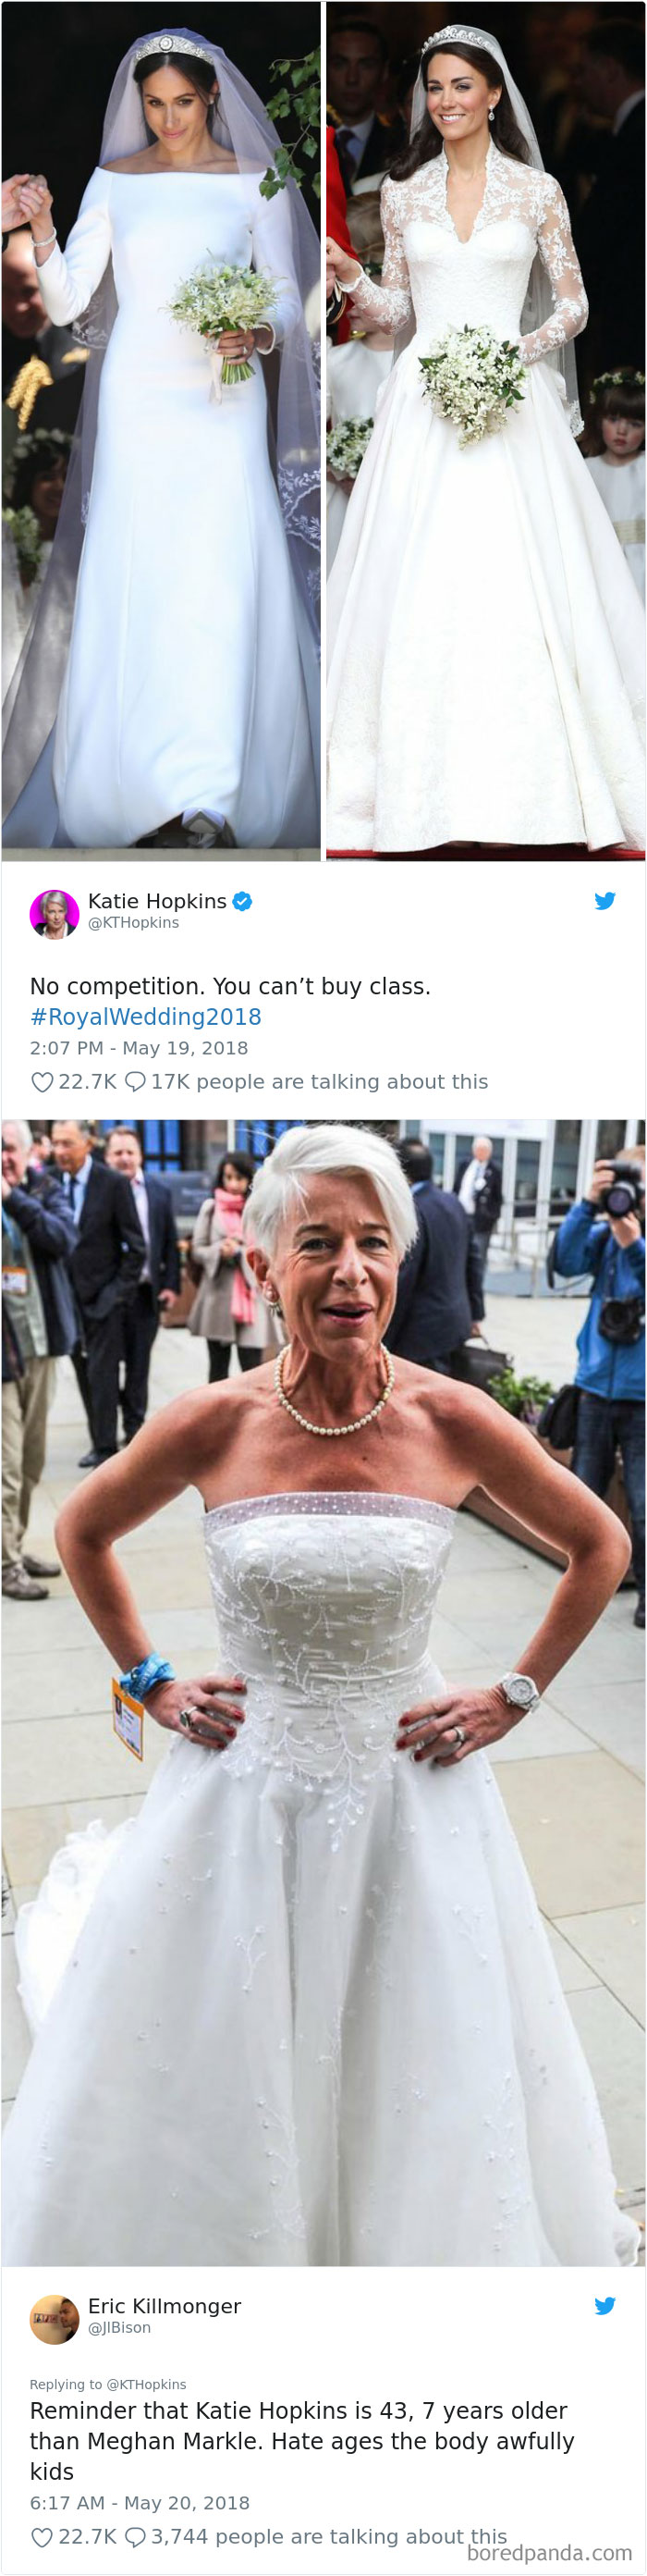 You Can't Buy Class